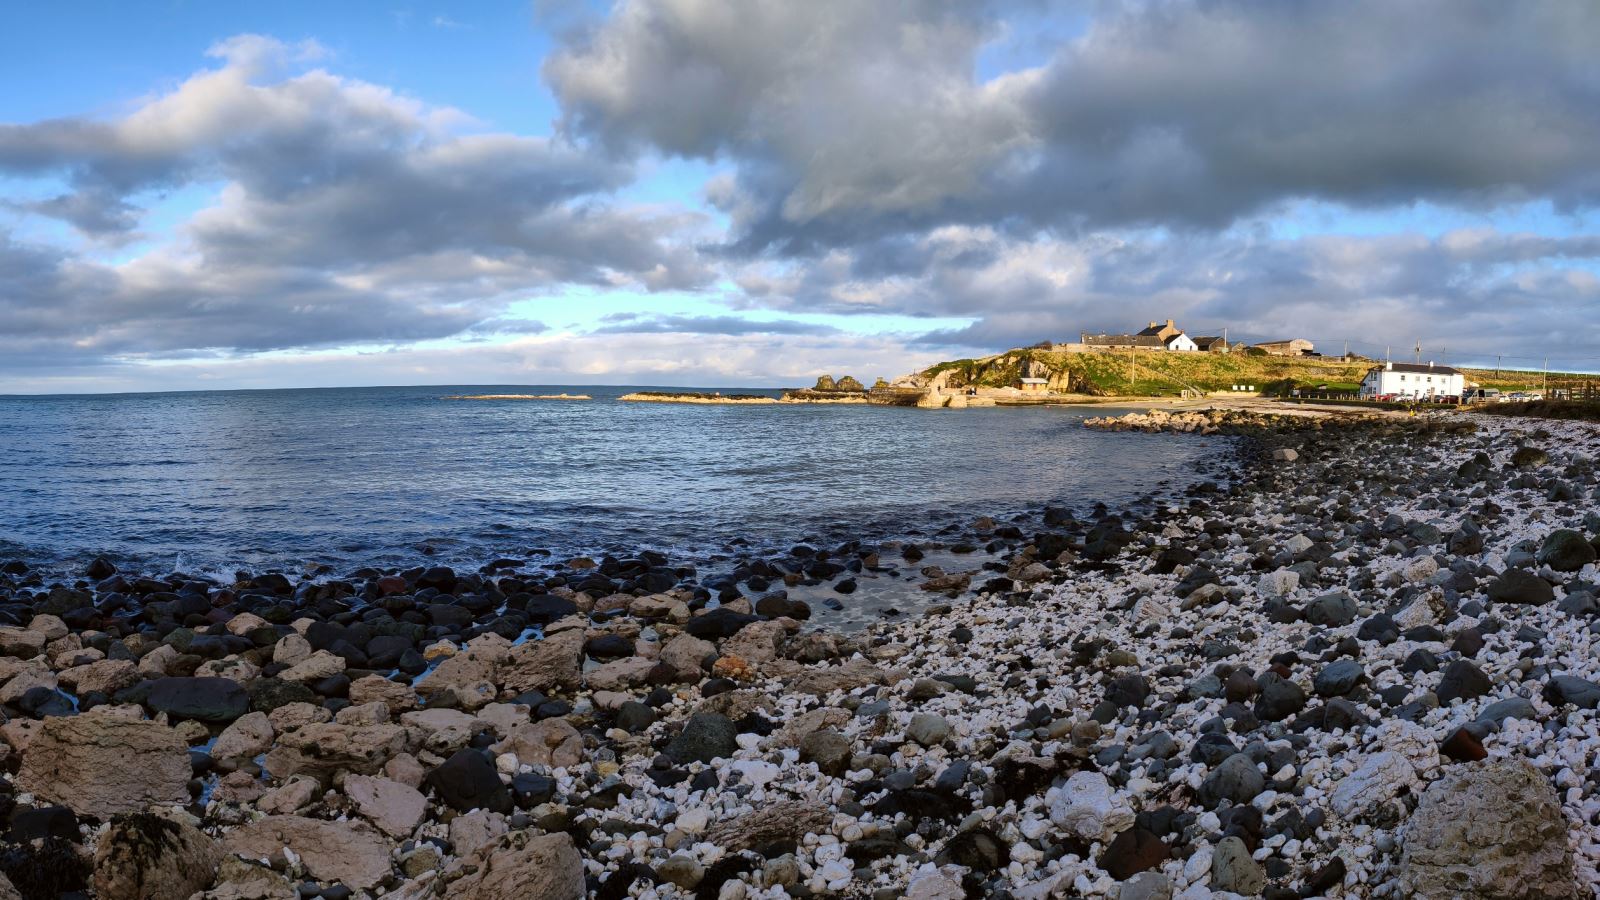 View of Portmuck Harbour showing rocky beach in front of sea